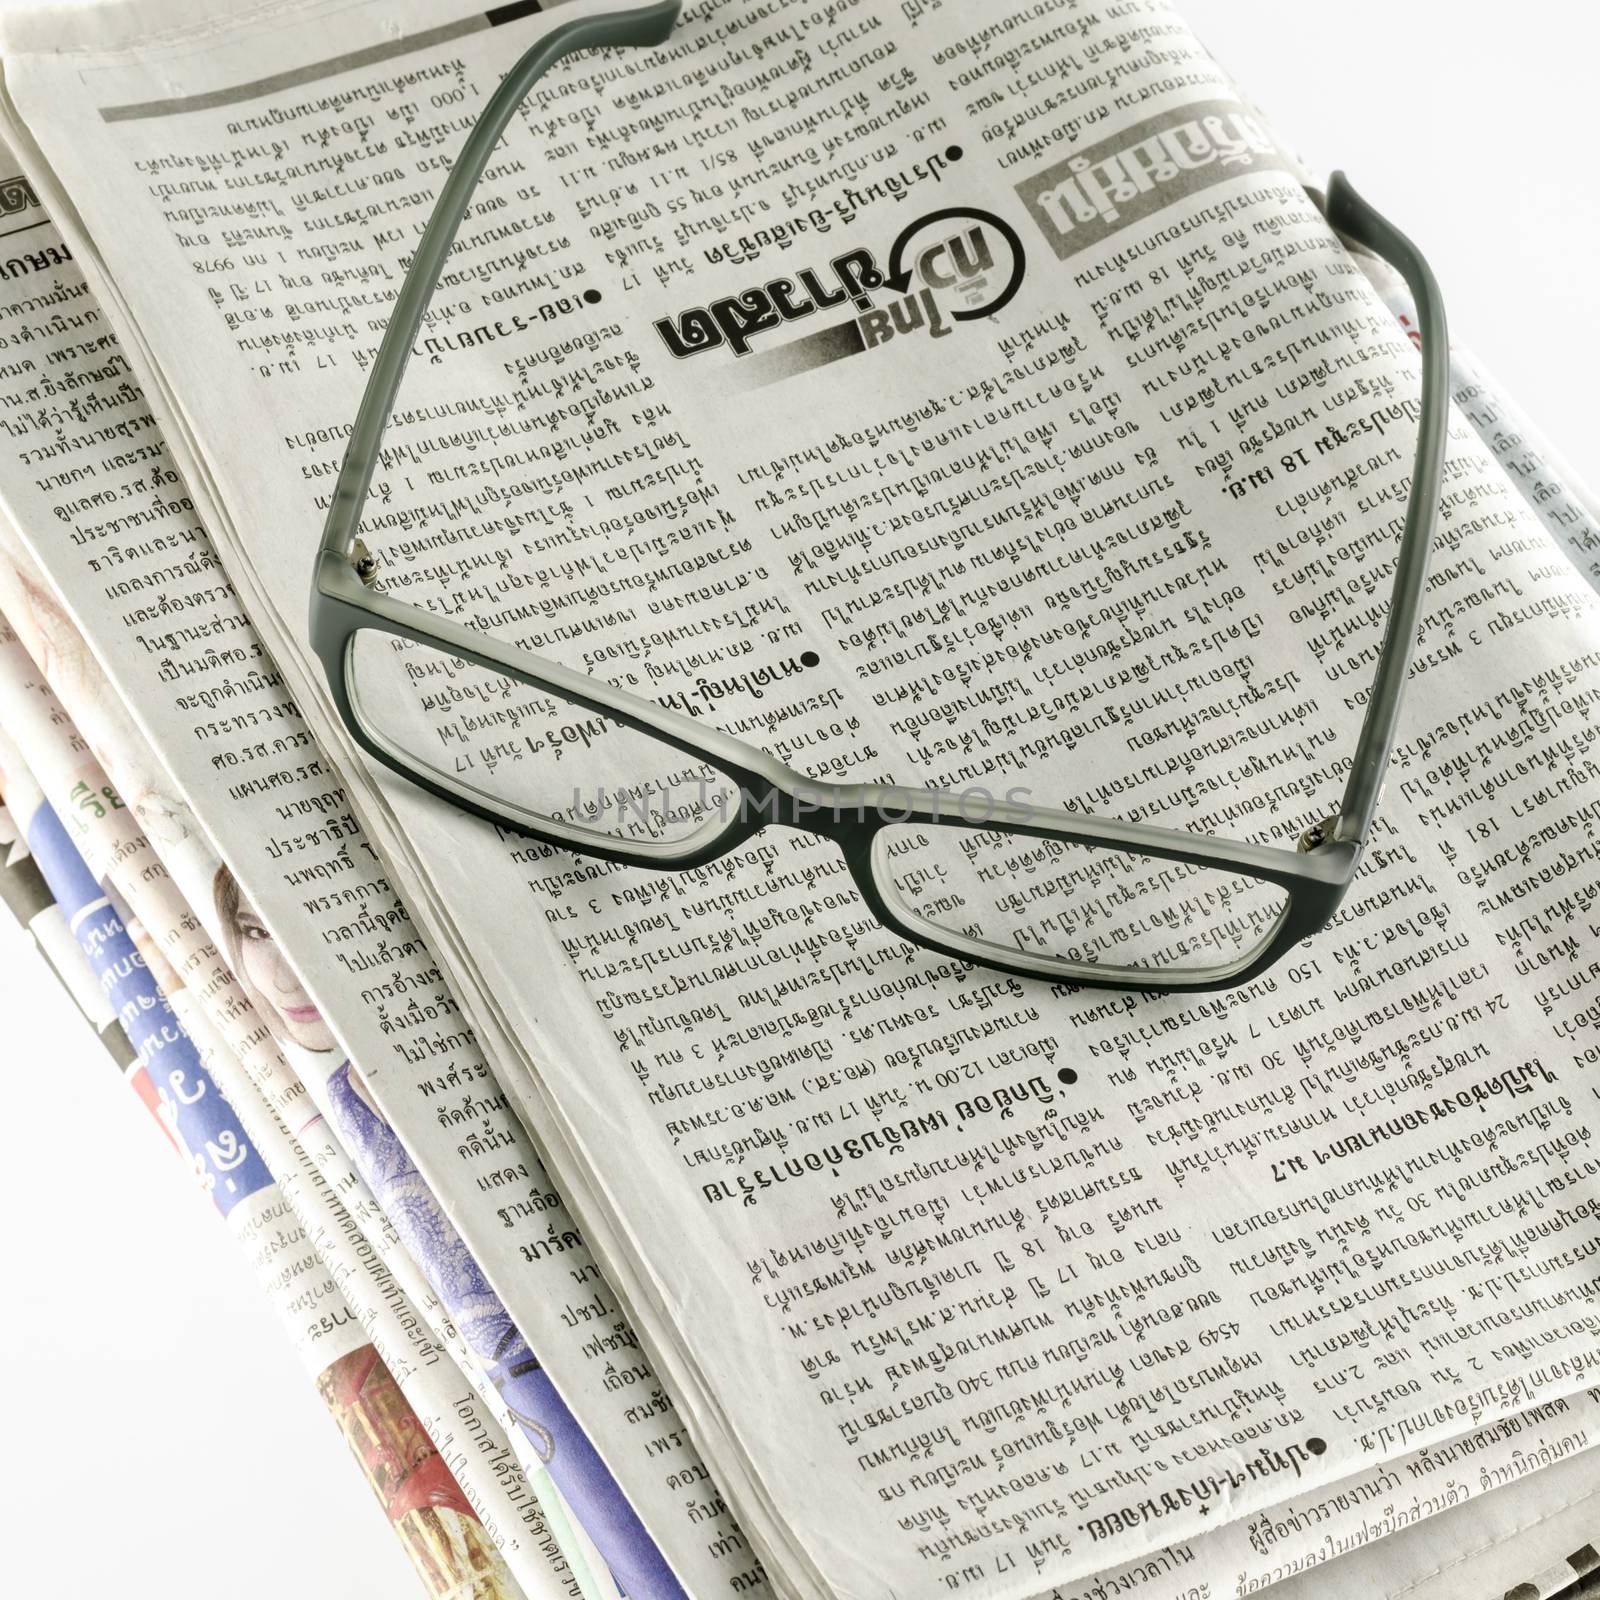 stack of newspaper with glasses on a white background